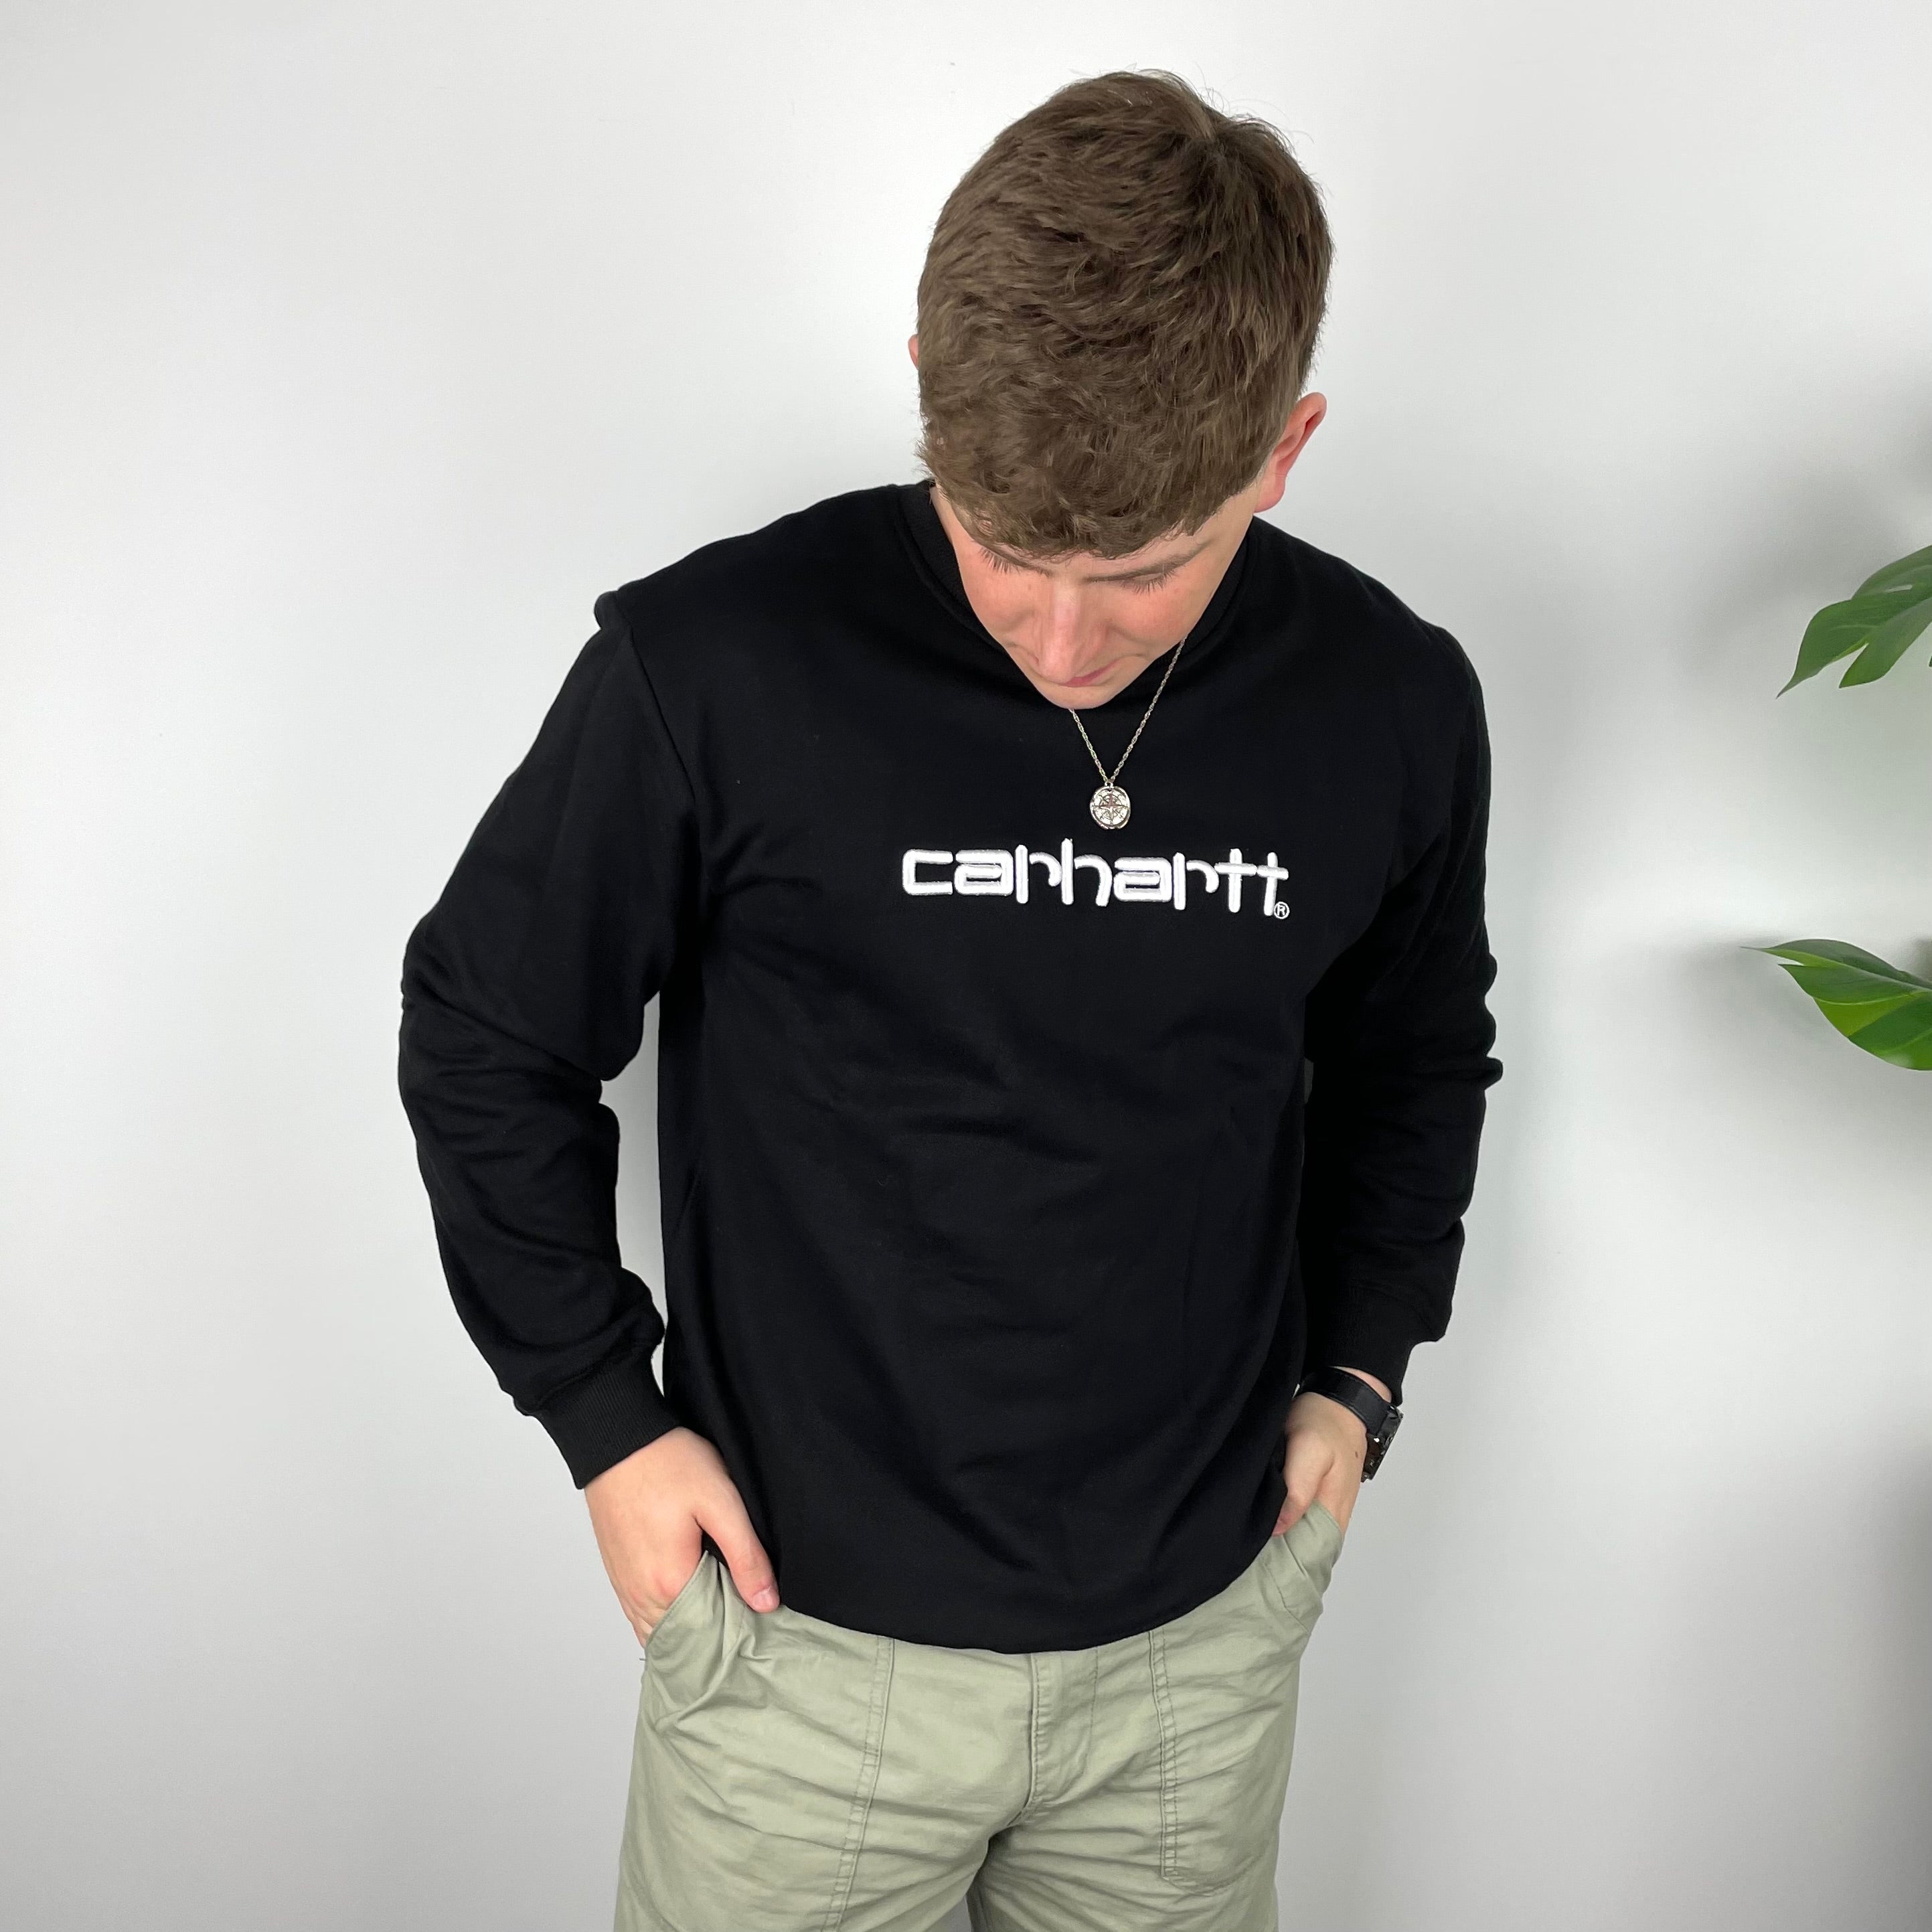 Carhartt RARE Black Embroidered Spell Out Sweatshirt (XL)